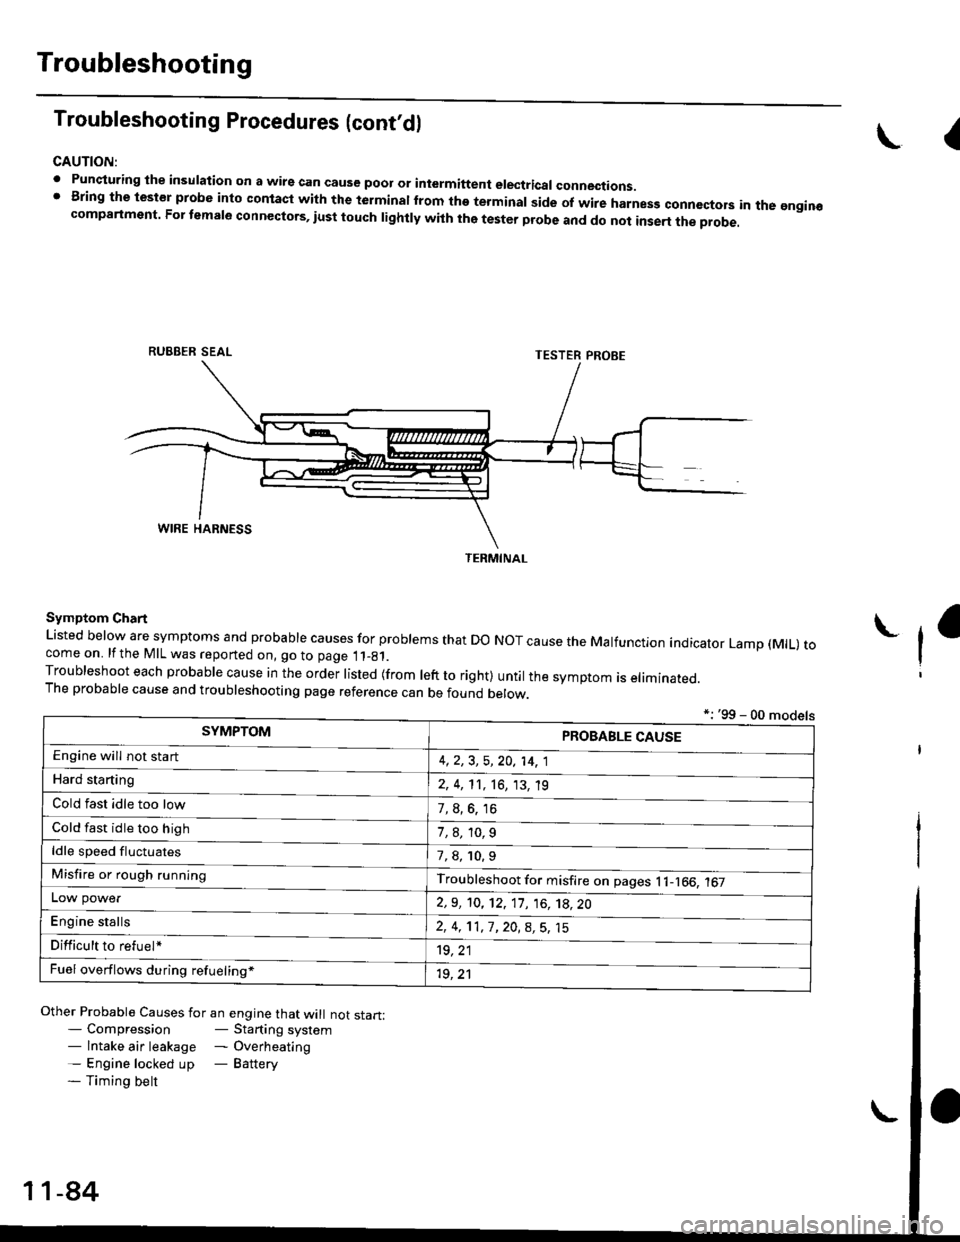 HONDA CIVIC 1998 6.G Workshop Manual Troubleshooting
Troubleshooting Procedures (cont,dl
CAUTION:
. Punqturing ihe insulation on a wirs can cause poor or intermiftent electricar connections.I Bring the test€r probe into contacl with th